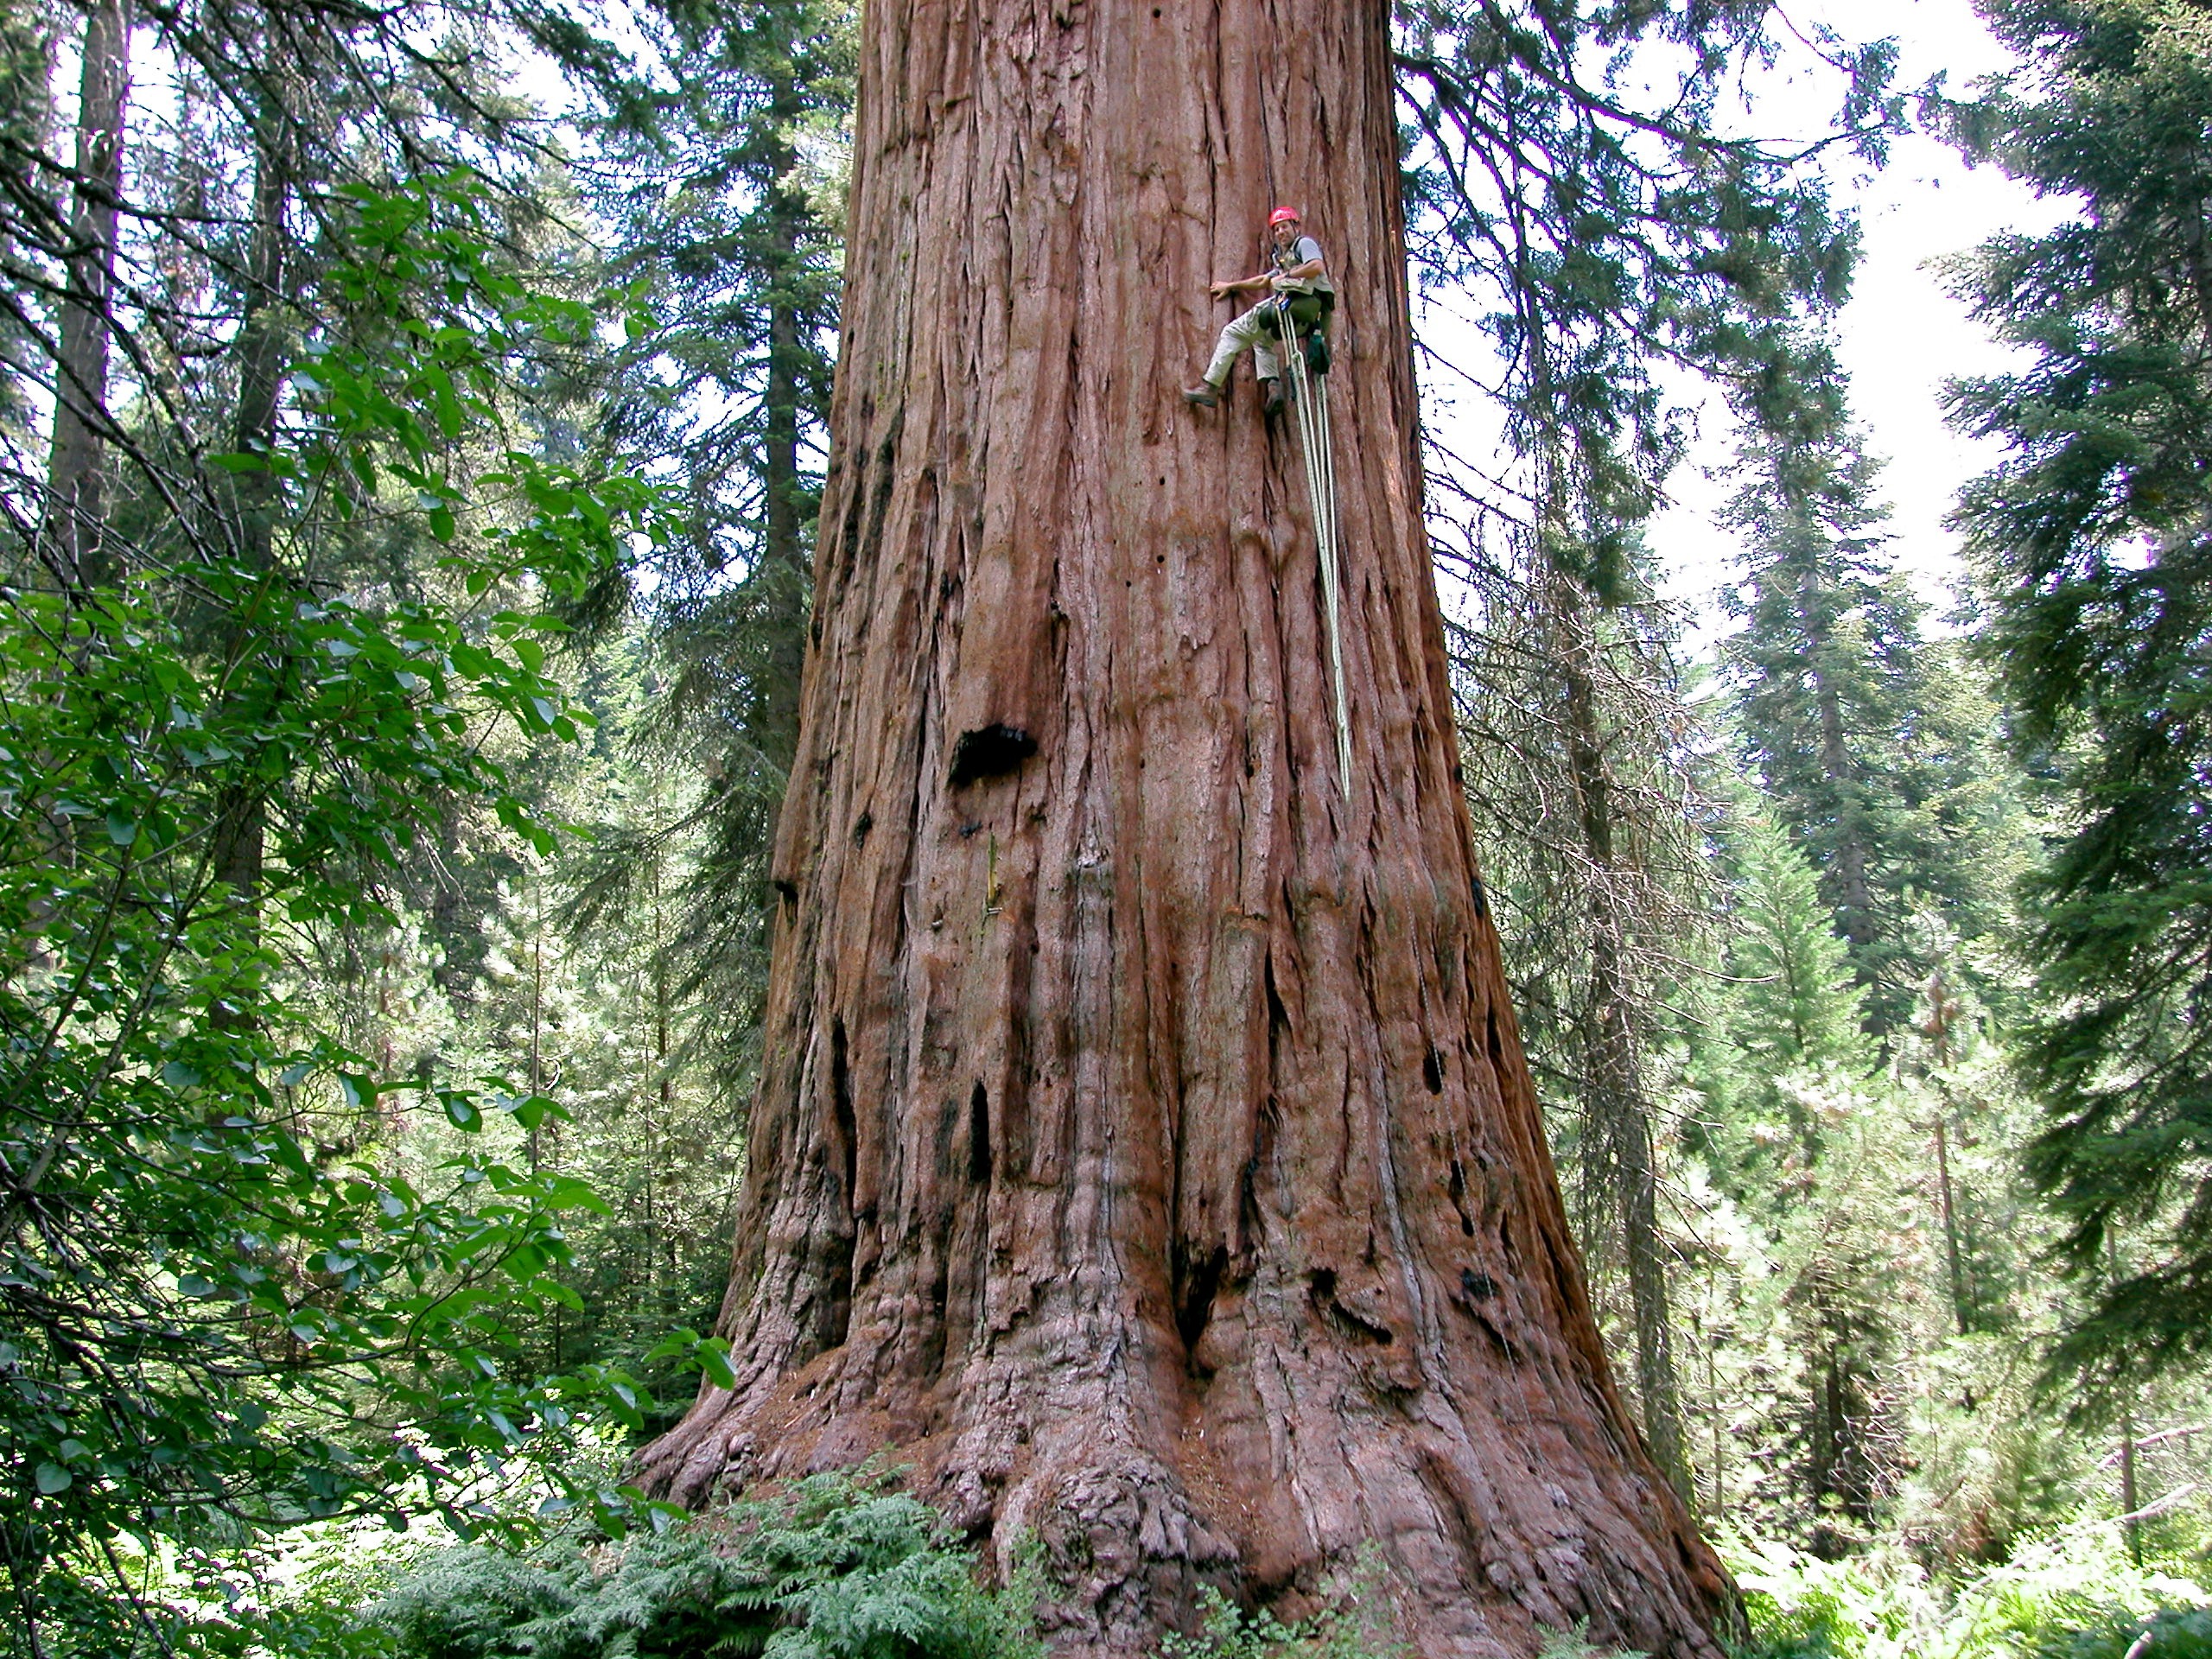 Researcher climbing a large redwood tree.